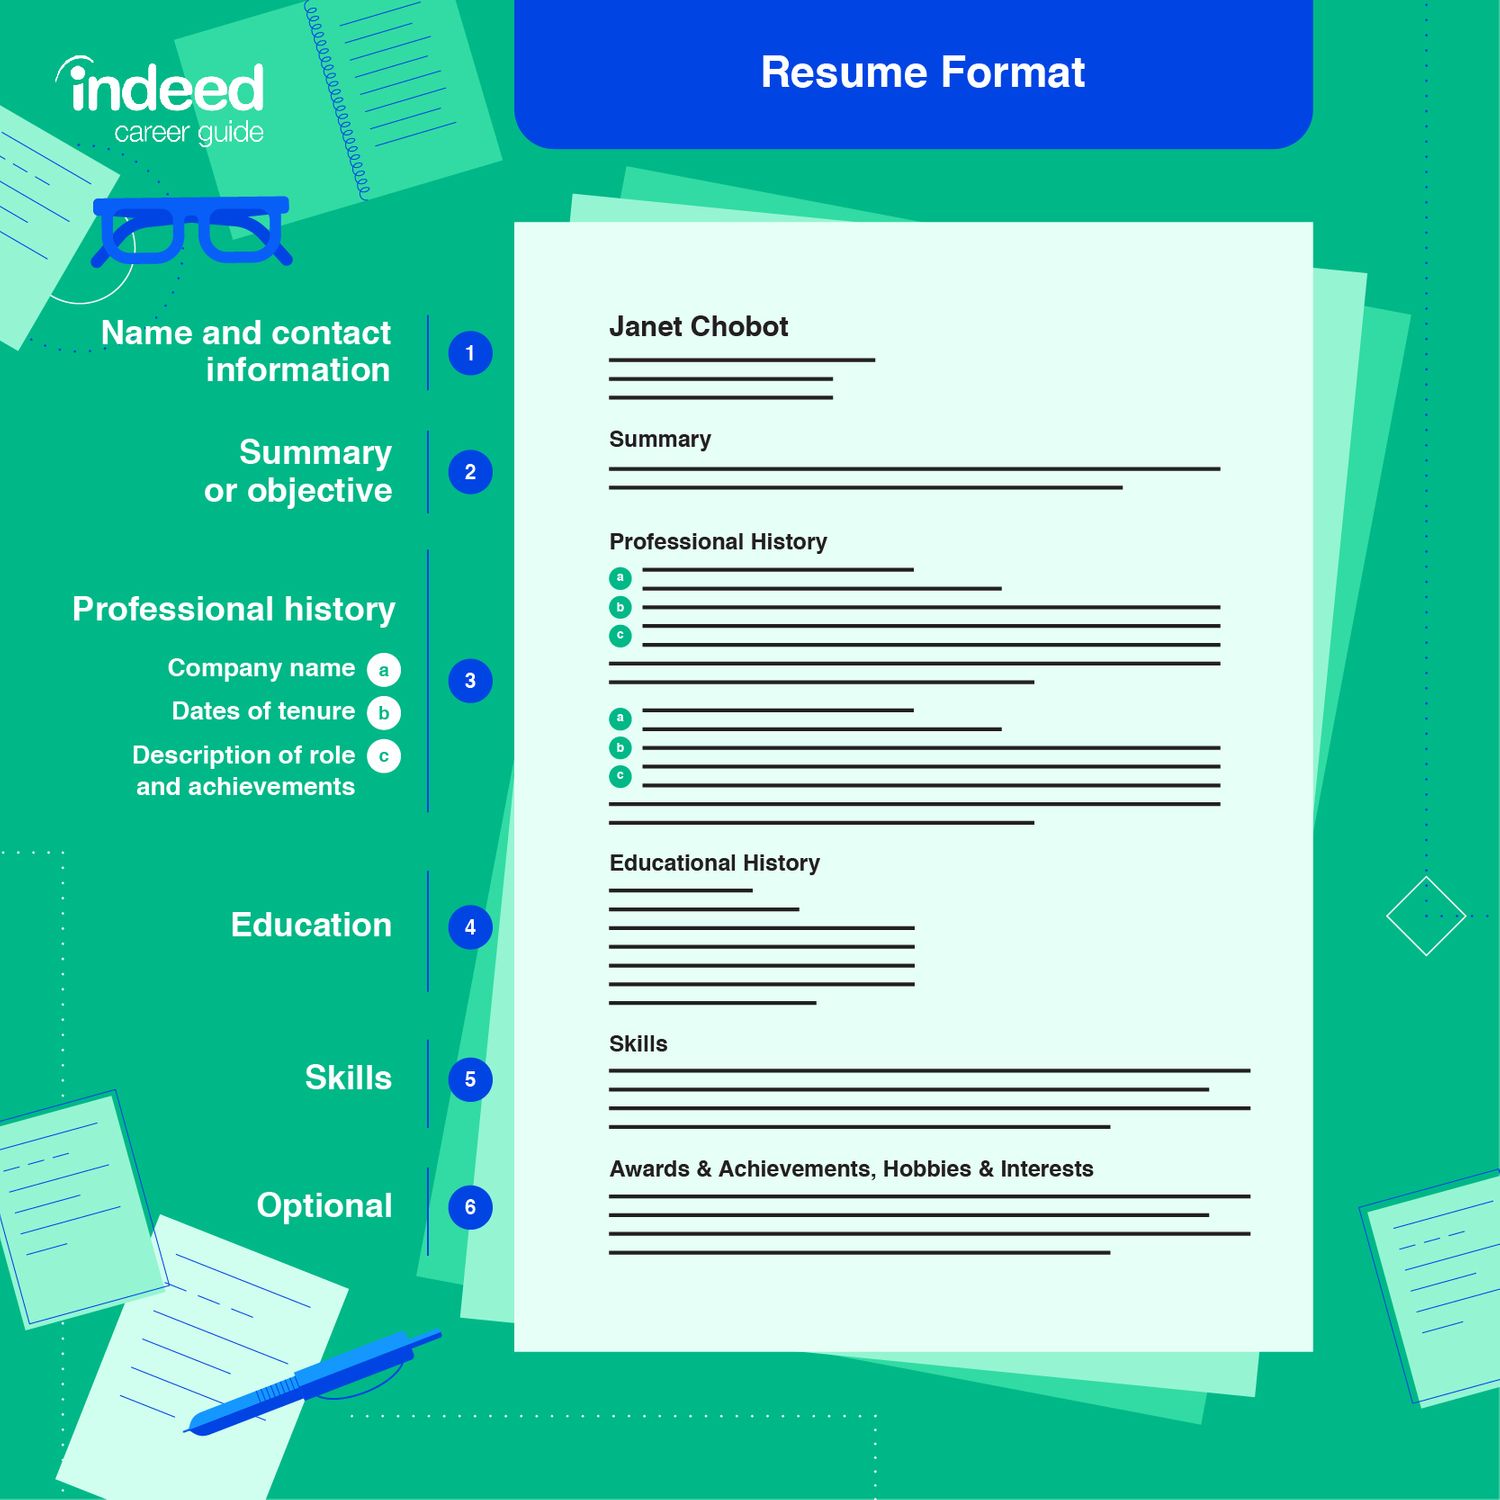 How to Write a Human Resources Resume Objective